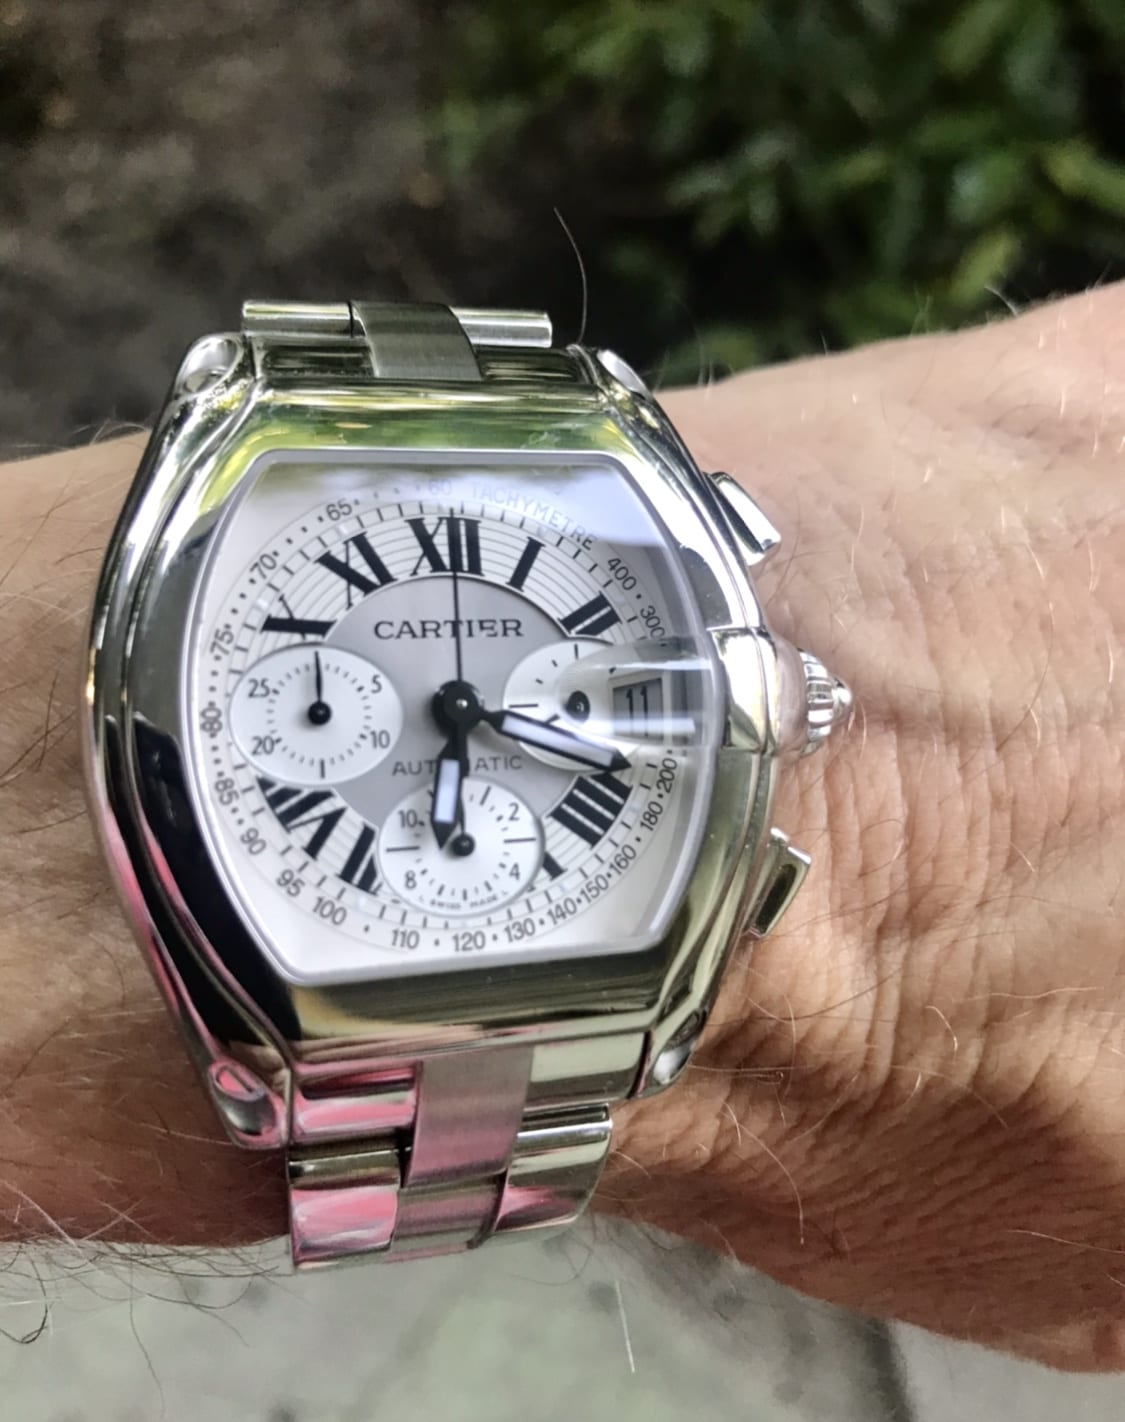 Cartier Roadster XL | Value Your Watch